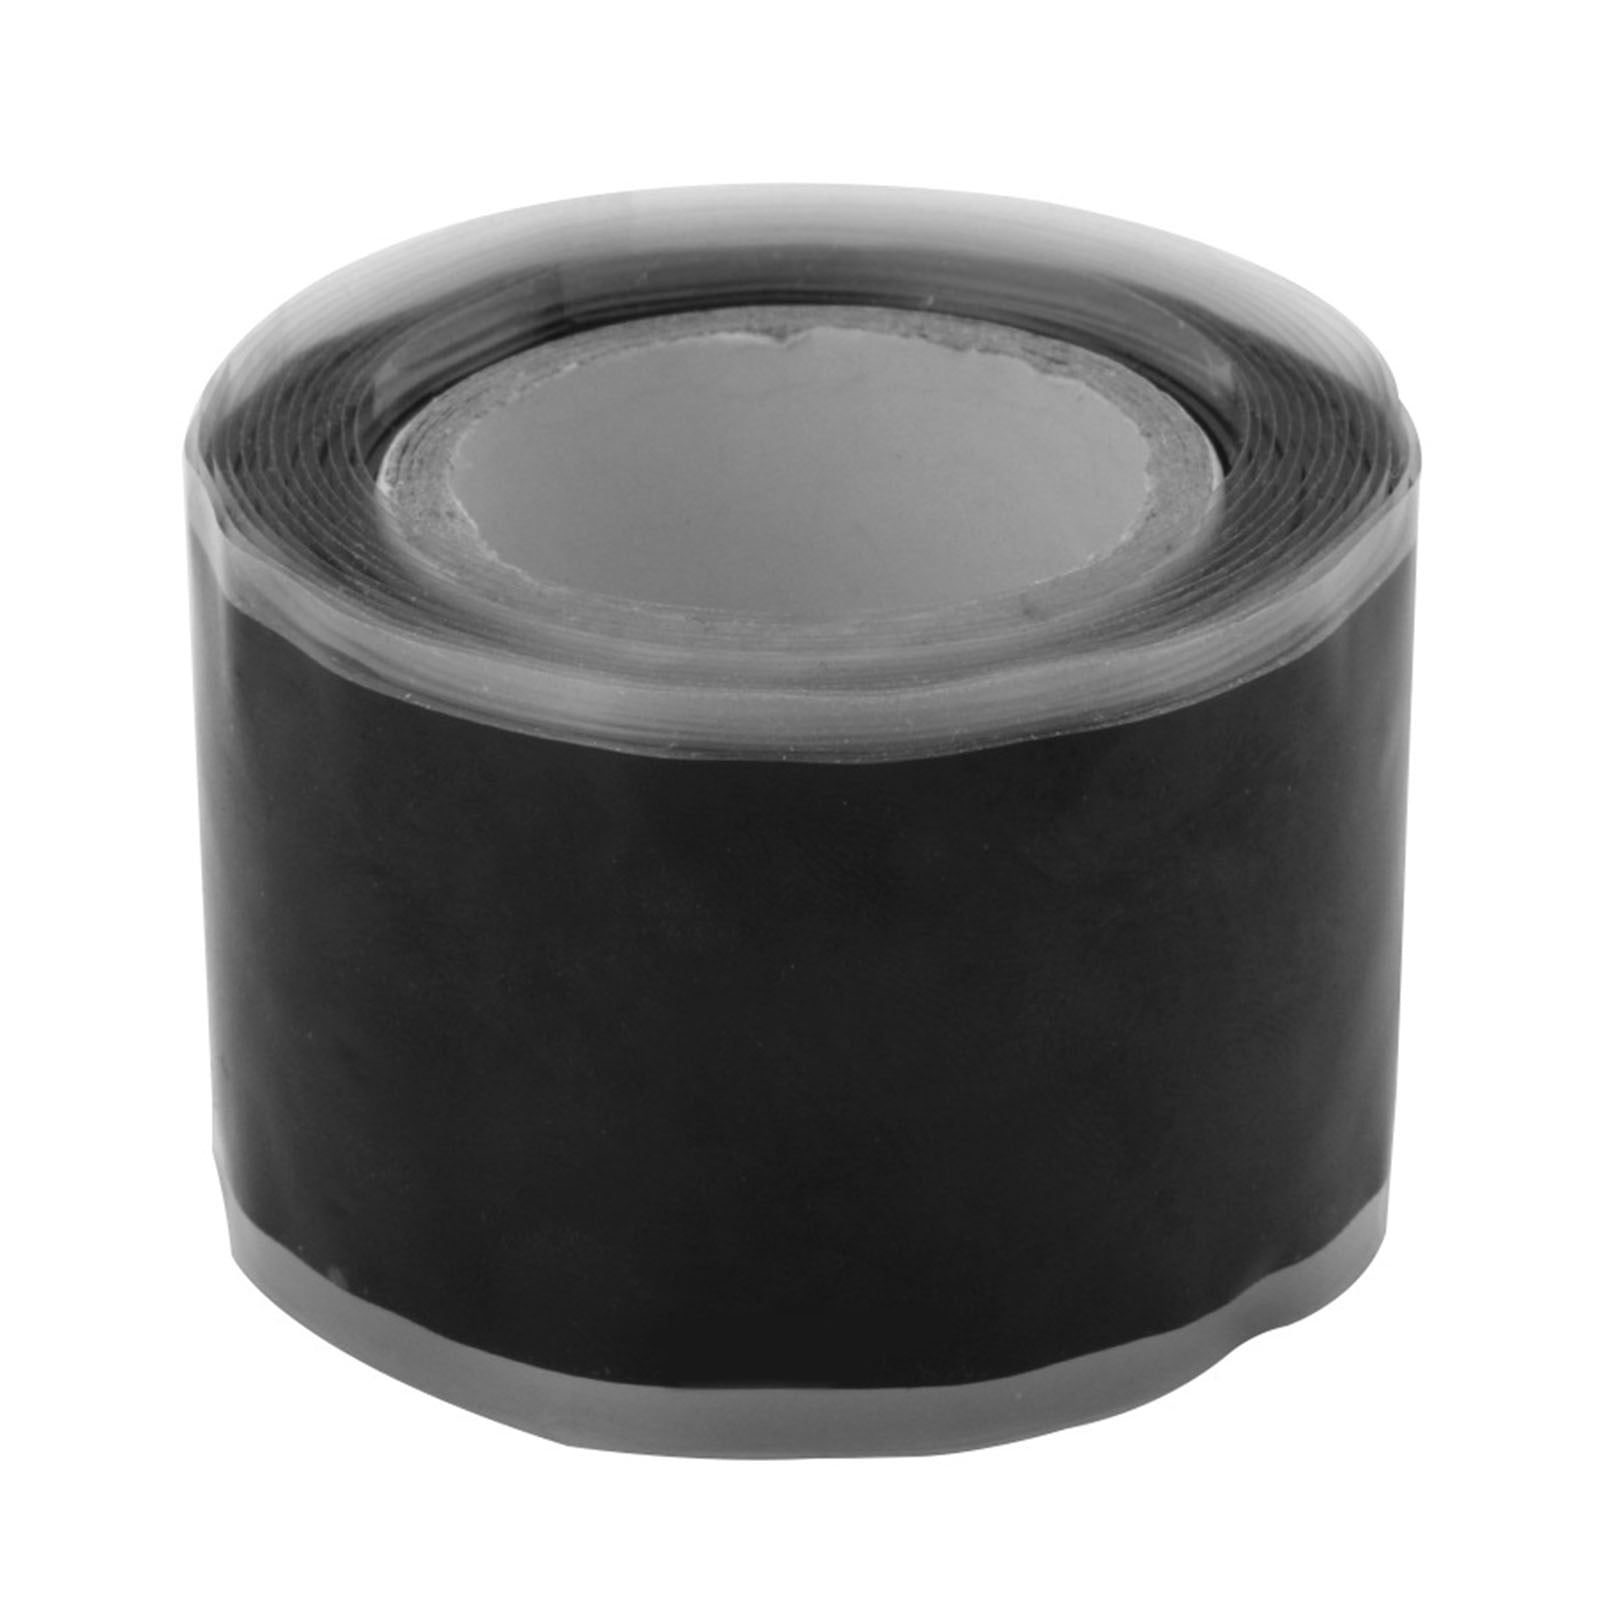 Waterproof Silicone Tape for Sealing Outdoor Cable & Connector